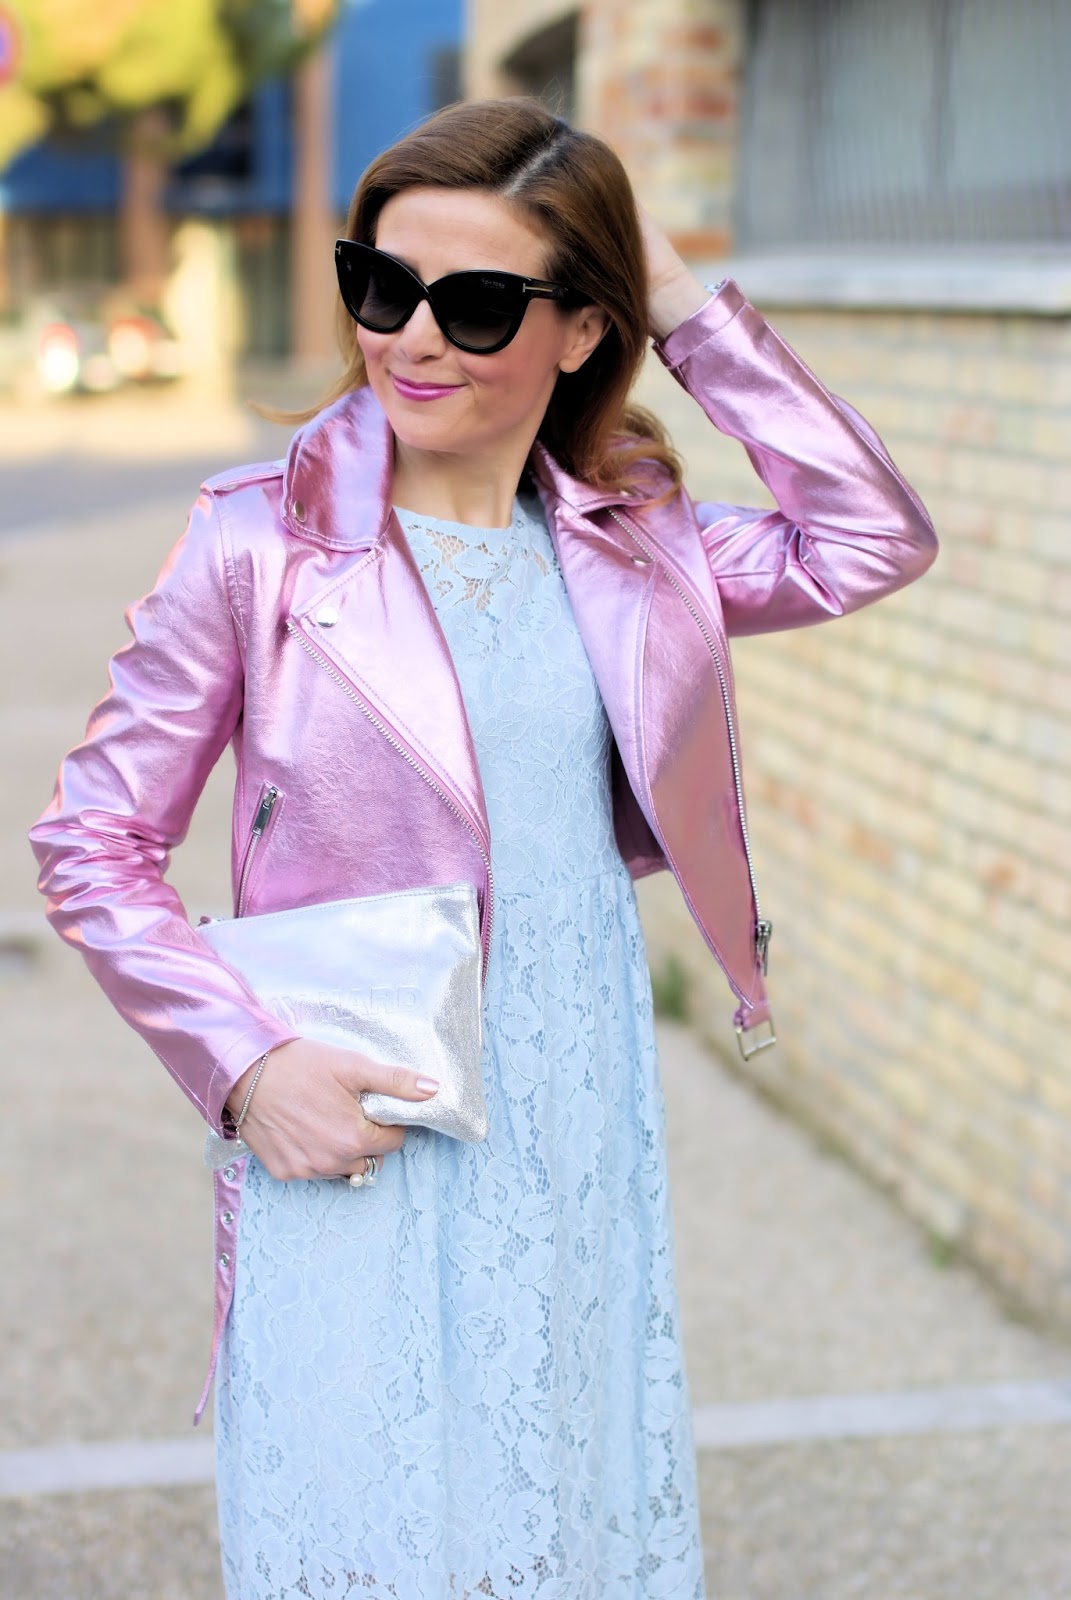 Lace dress and metallic pink motorbike jacket, SmartBuyGlasses Tom Ford sunglasses on Fashion and Cookies fashion blog, fashion blogger style